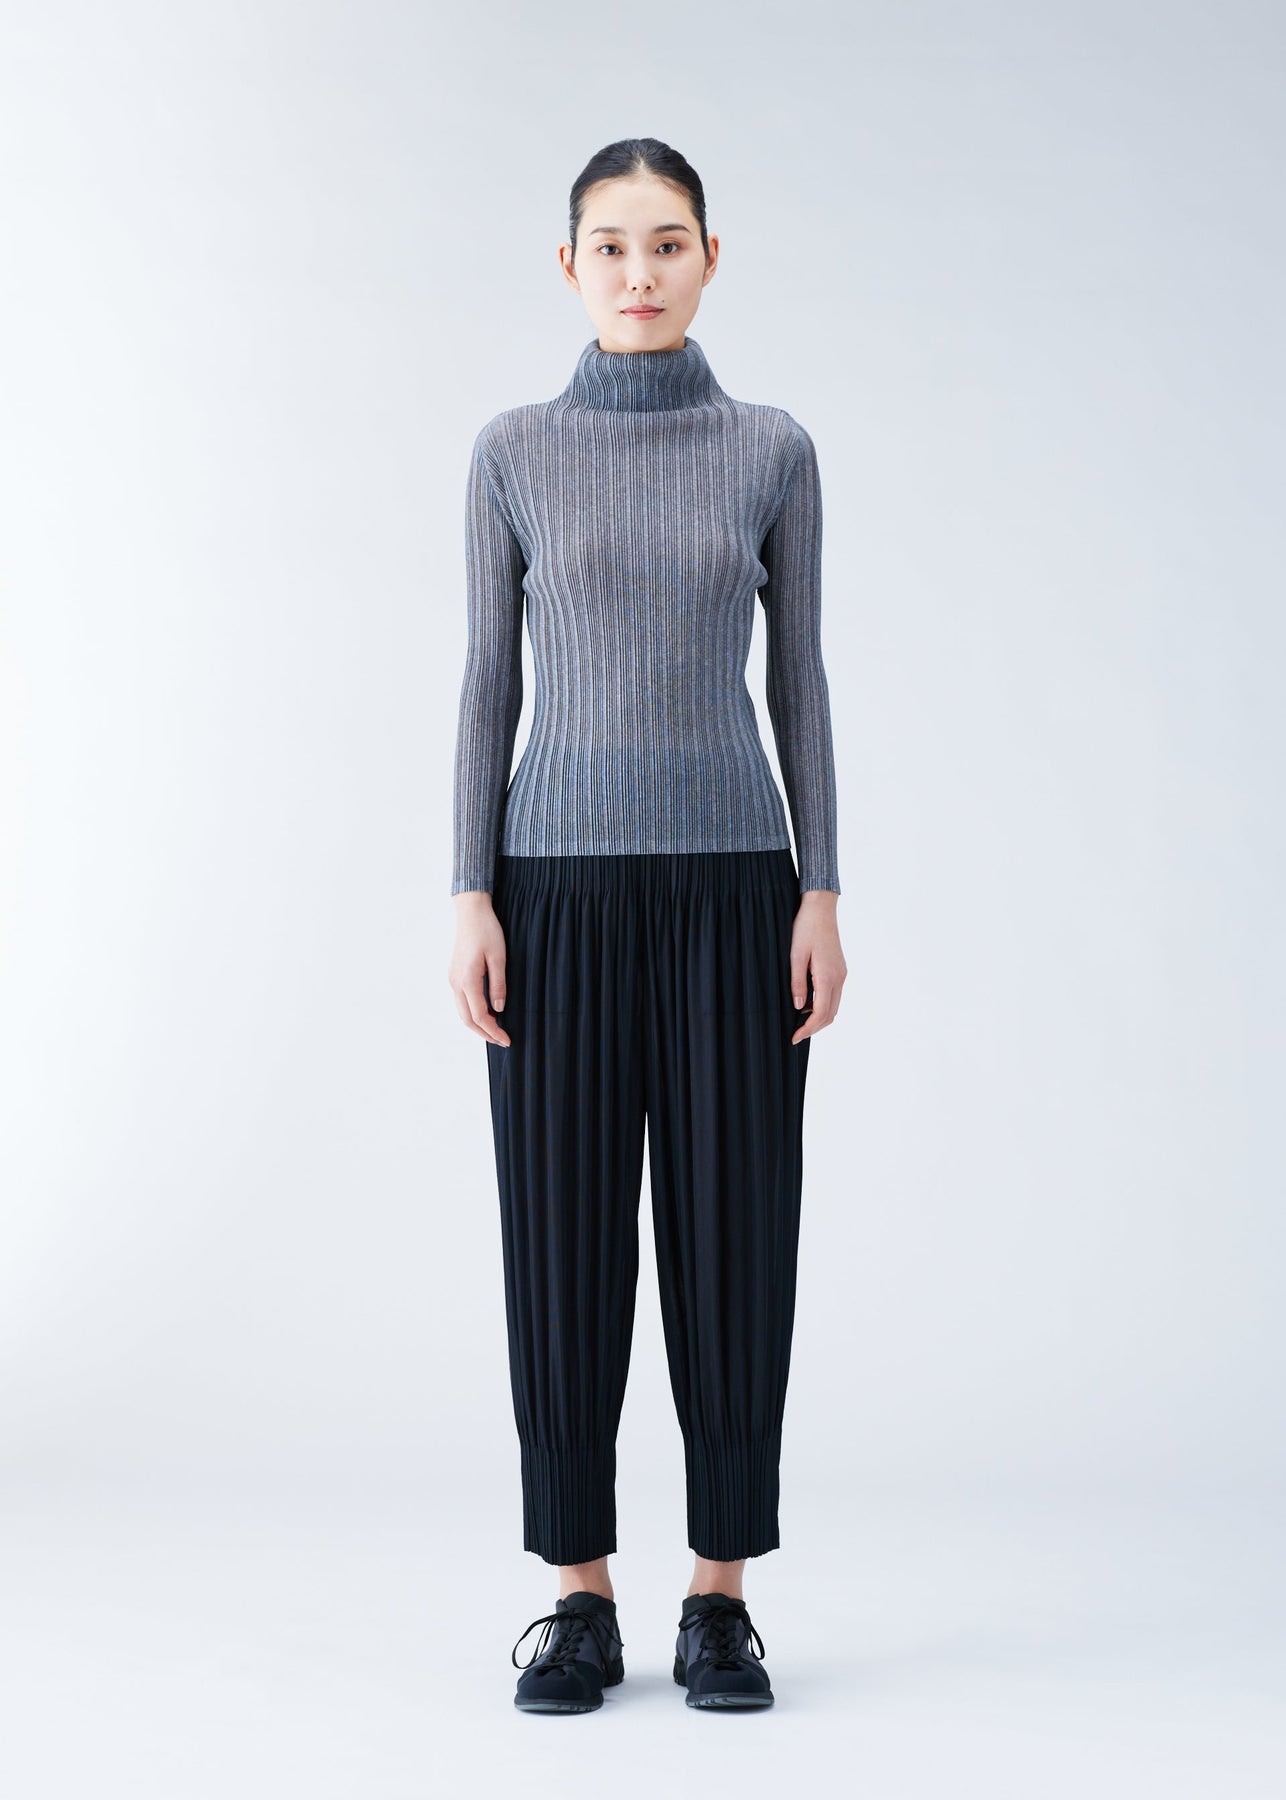 RIB PLEATS BASICS TOP | The official ISSEY MIYAKE ONLINE STORE